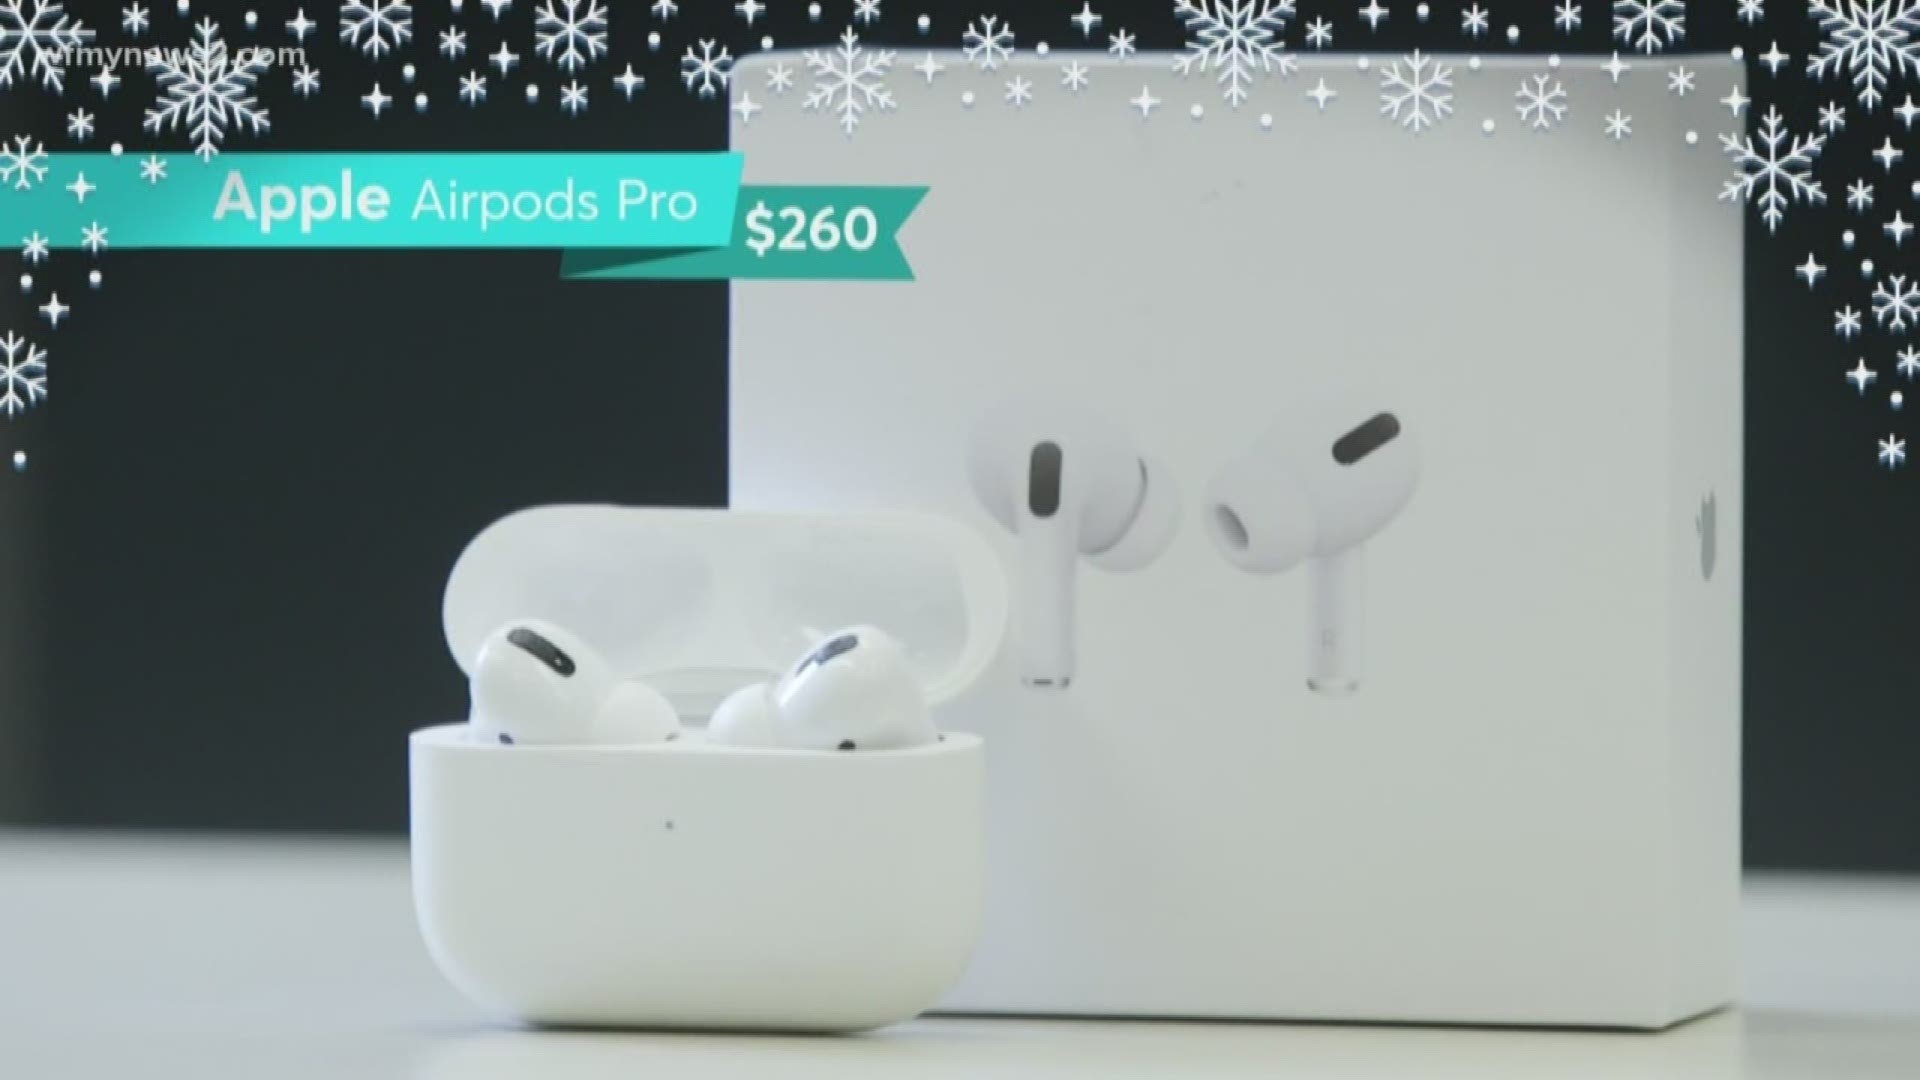 Are AirPods on the wish list? wfmynews2.com